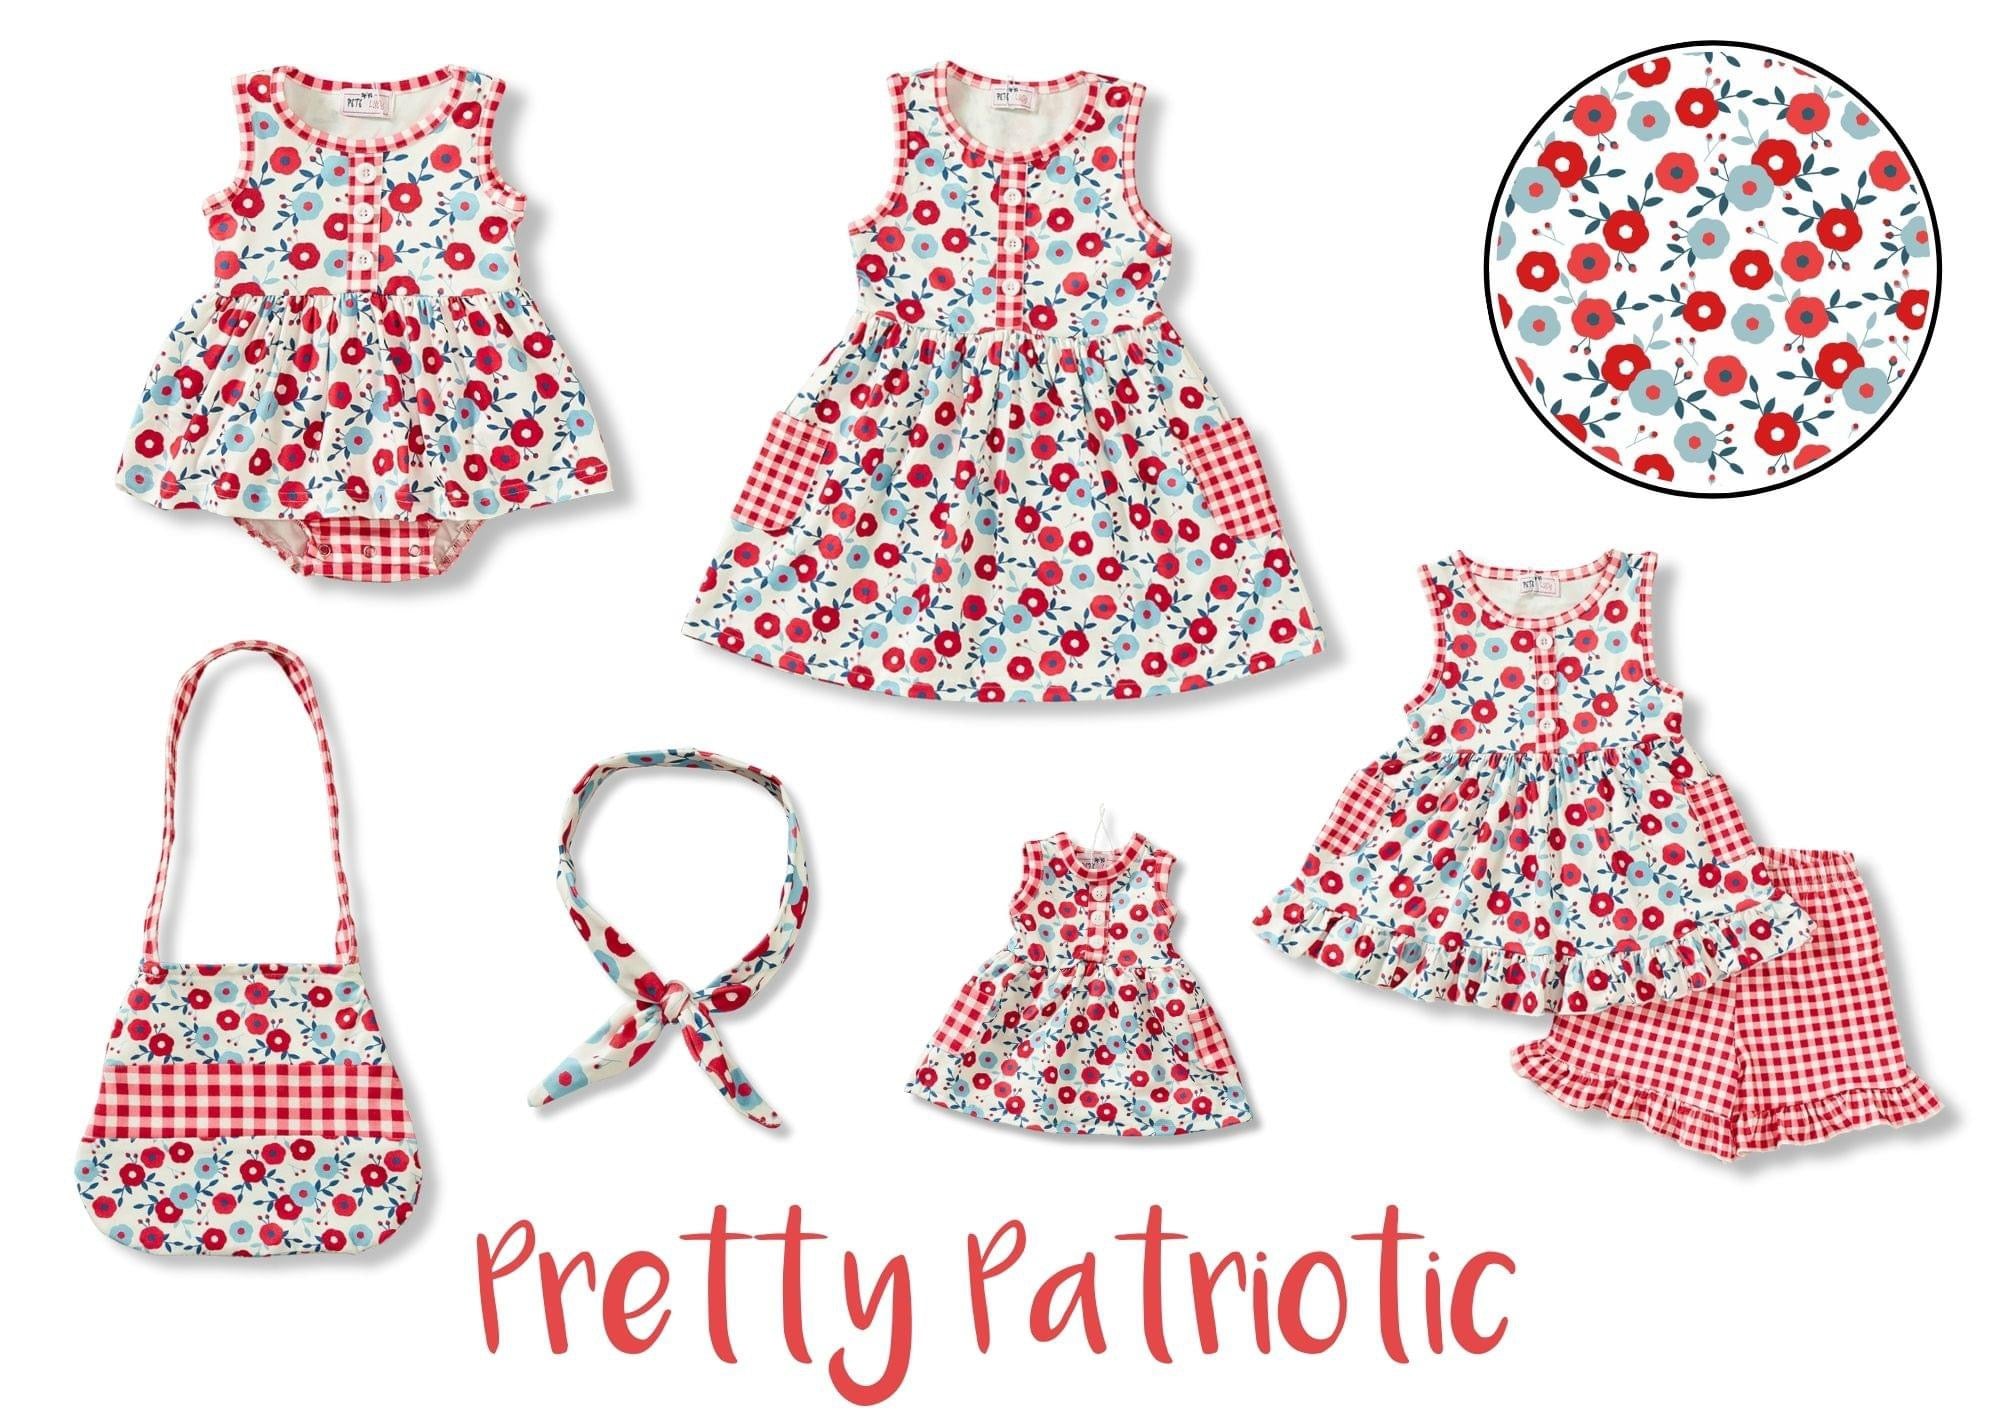 Pretty Patriotic Shorts Set by Pete and Lucy